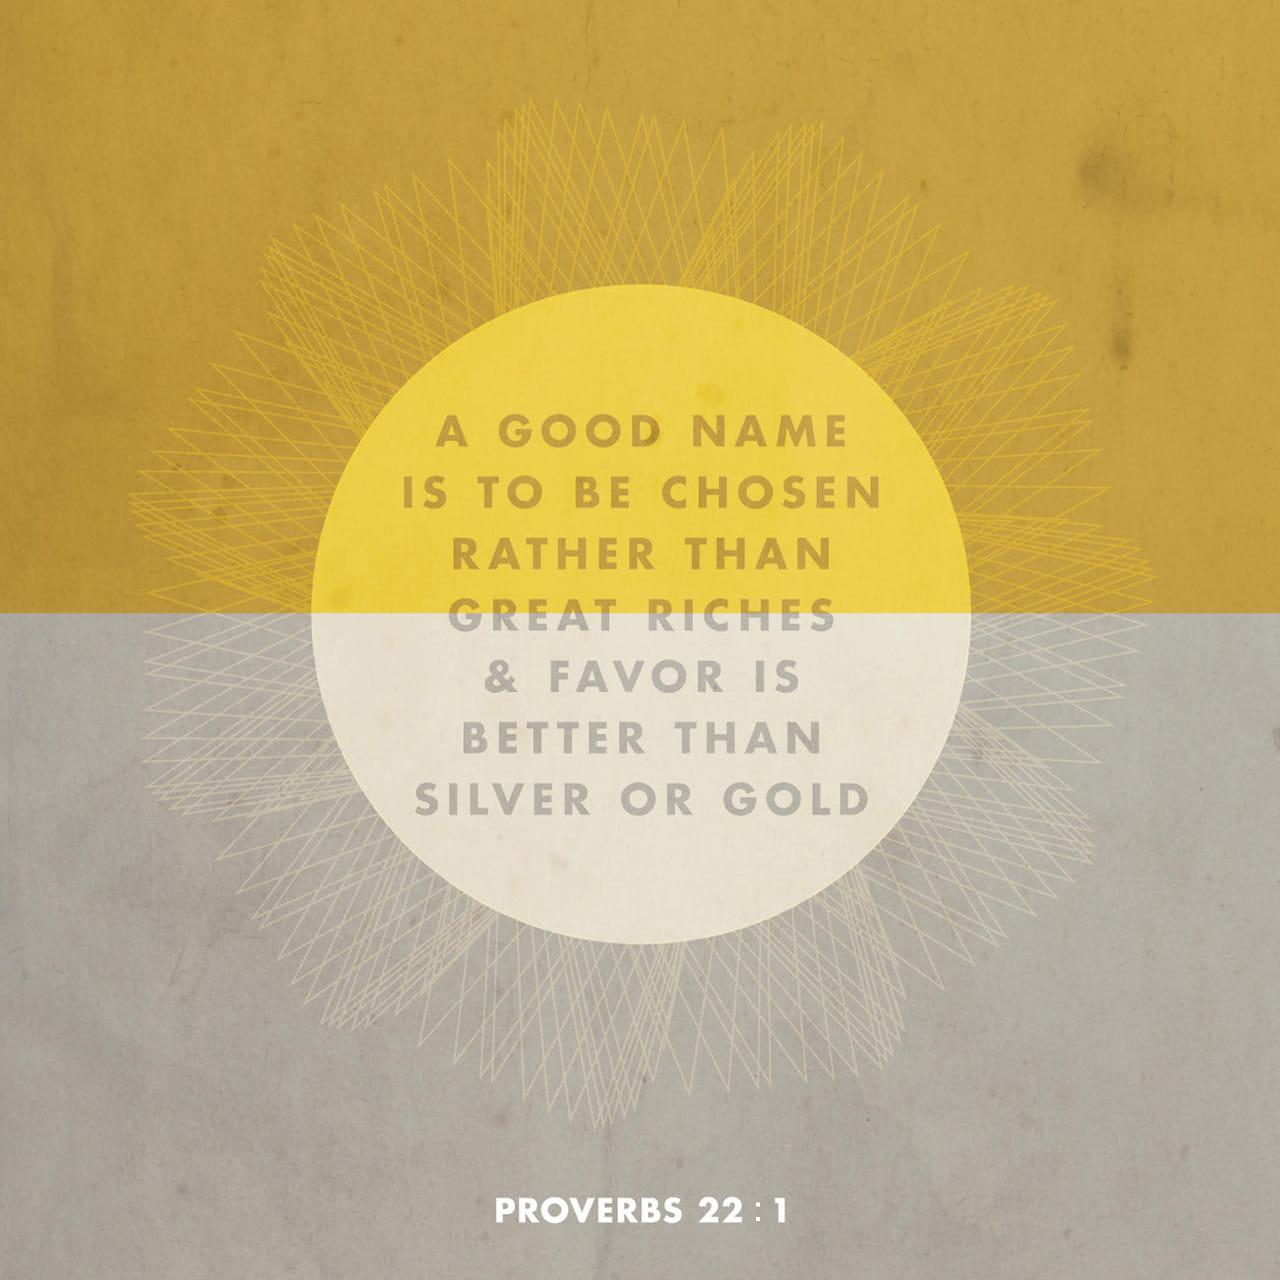 Bible Verse of the Day - day 81 - image 200 (Proverbs 22:1-2)